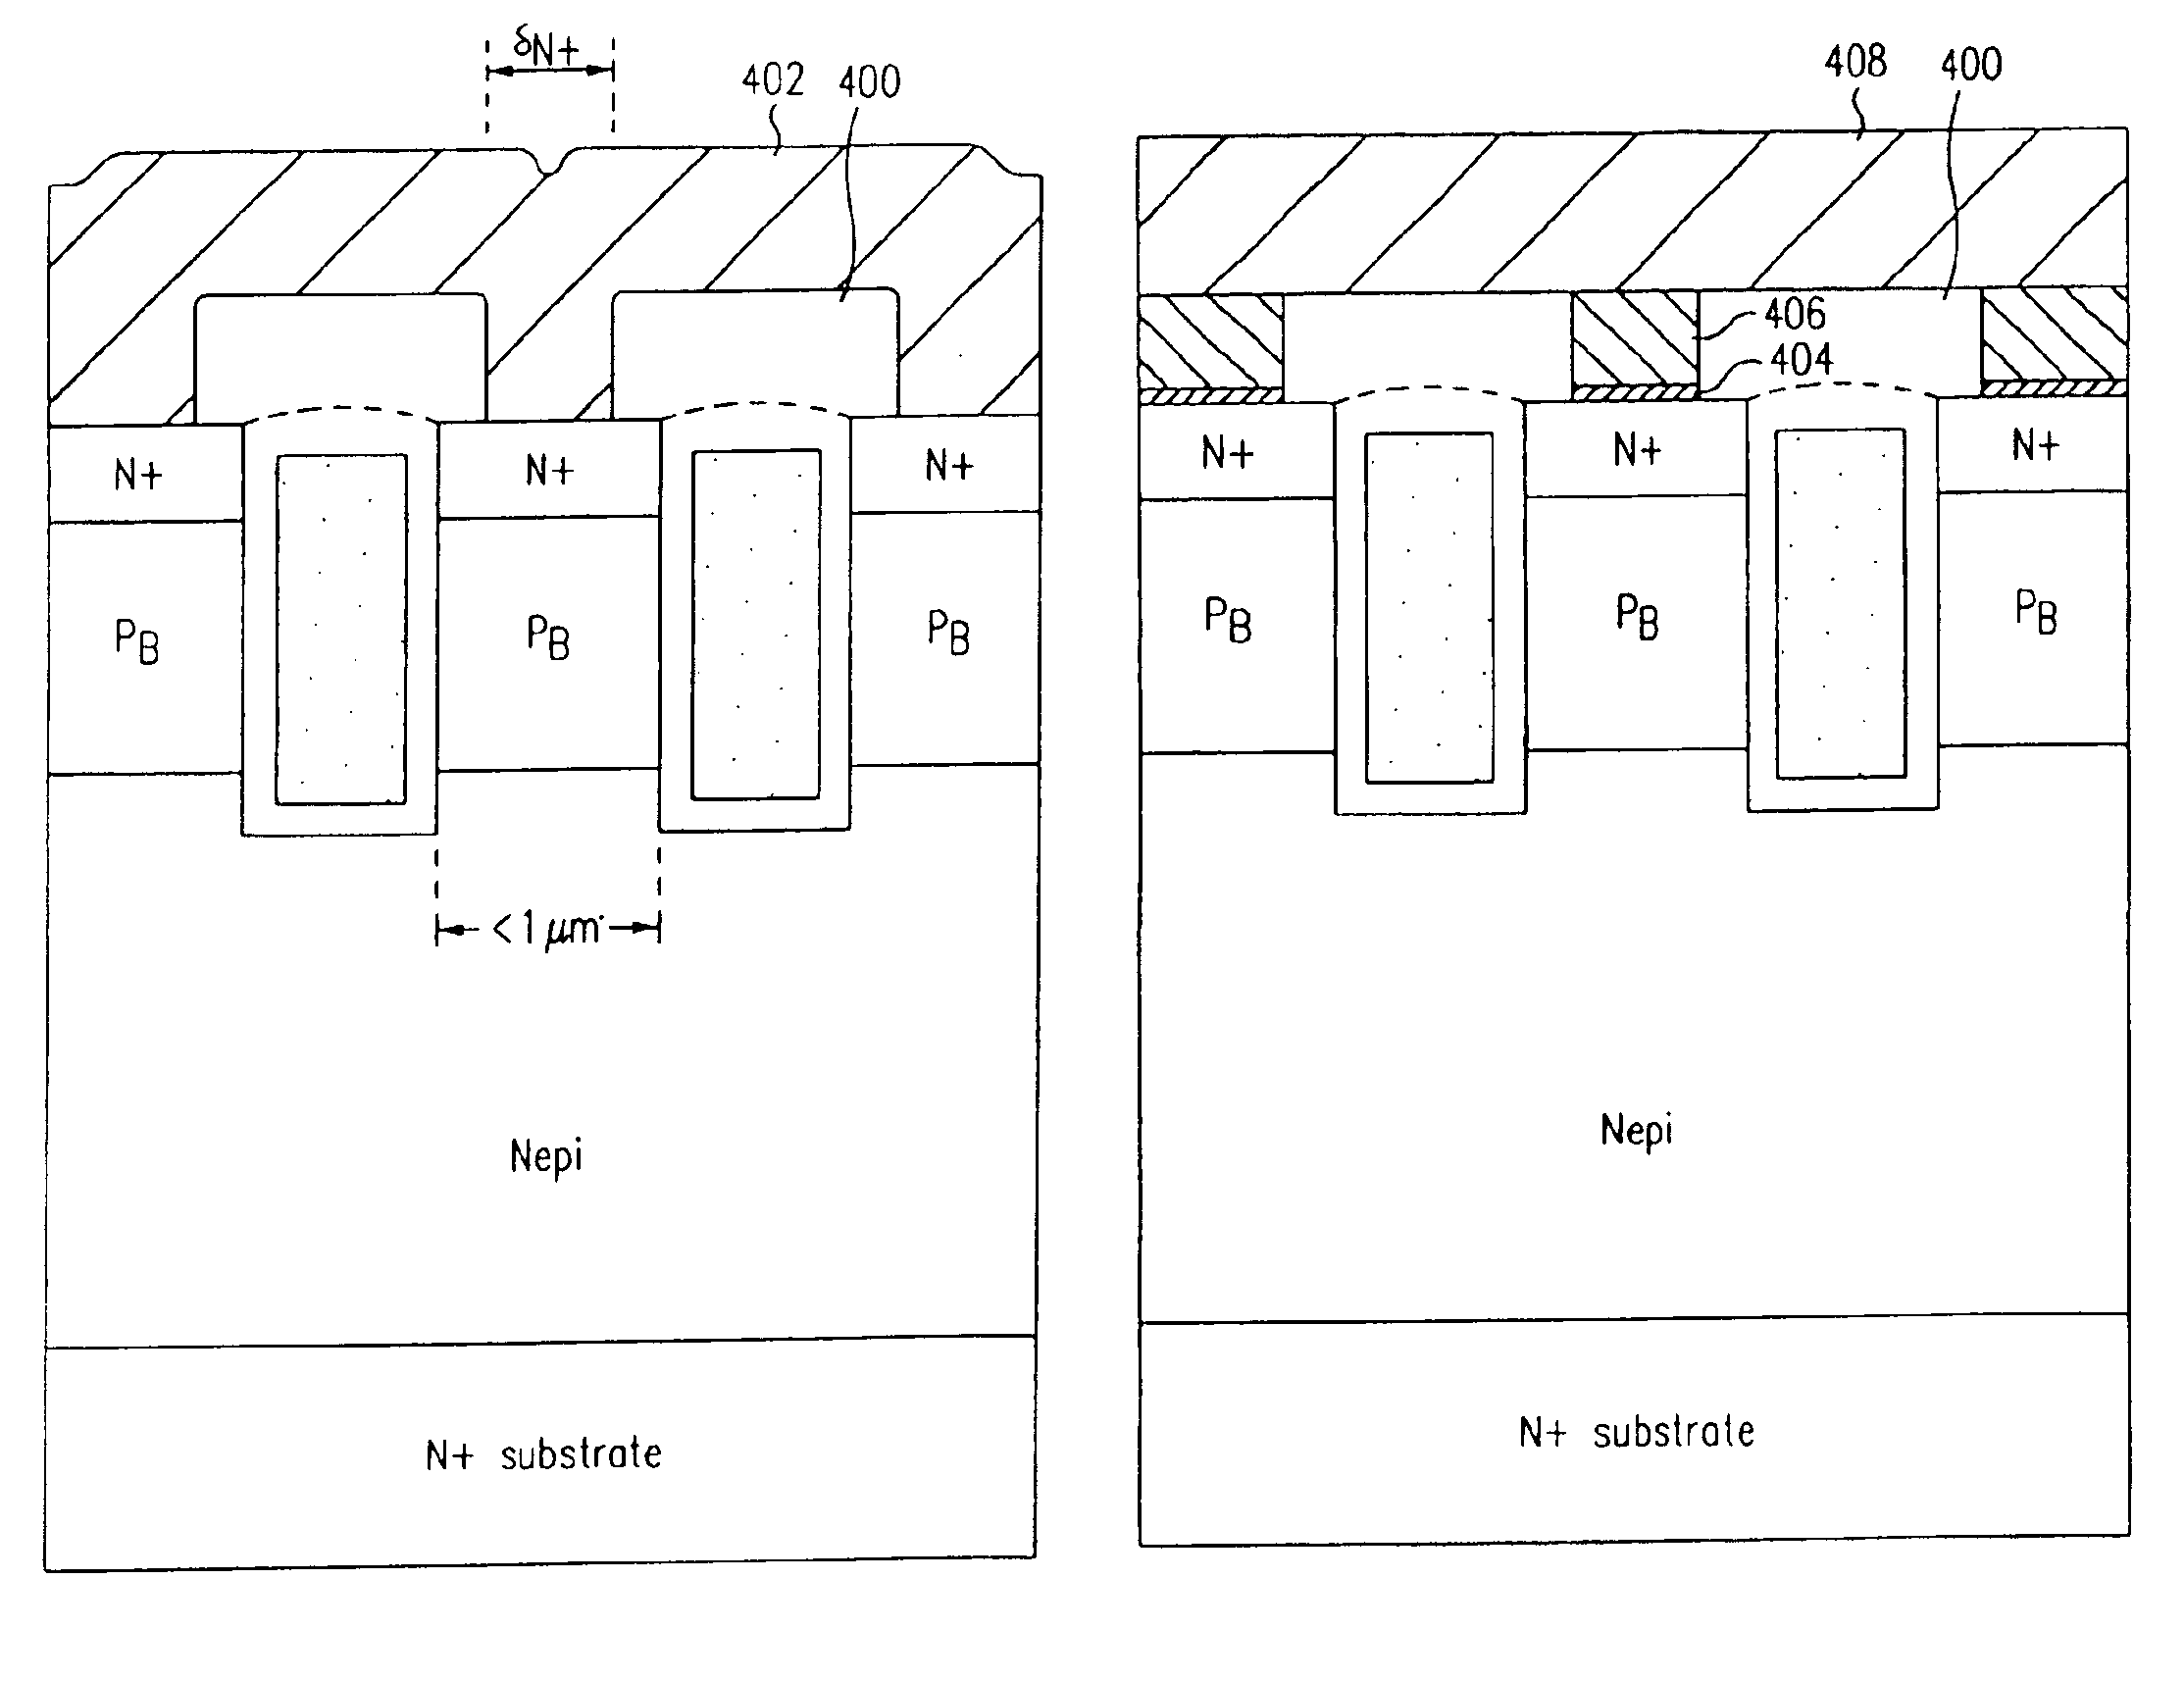 Self-aligned trench transistor using etched contact